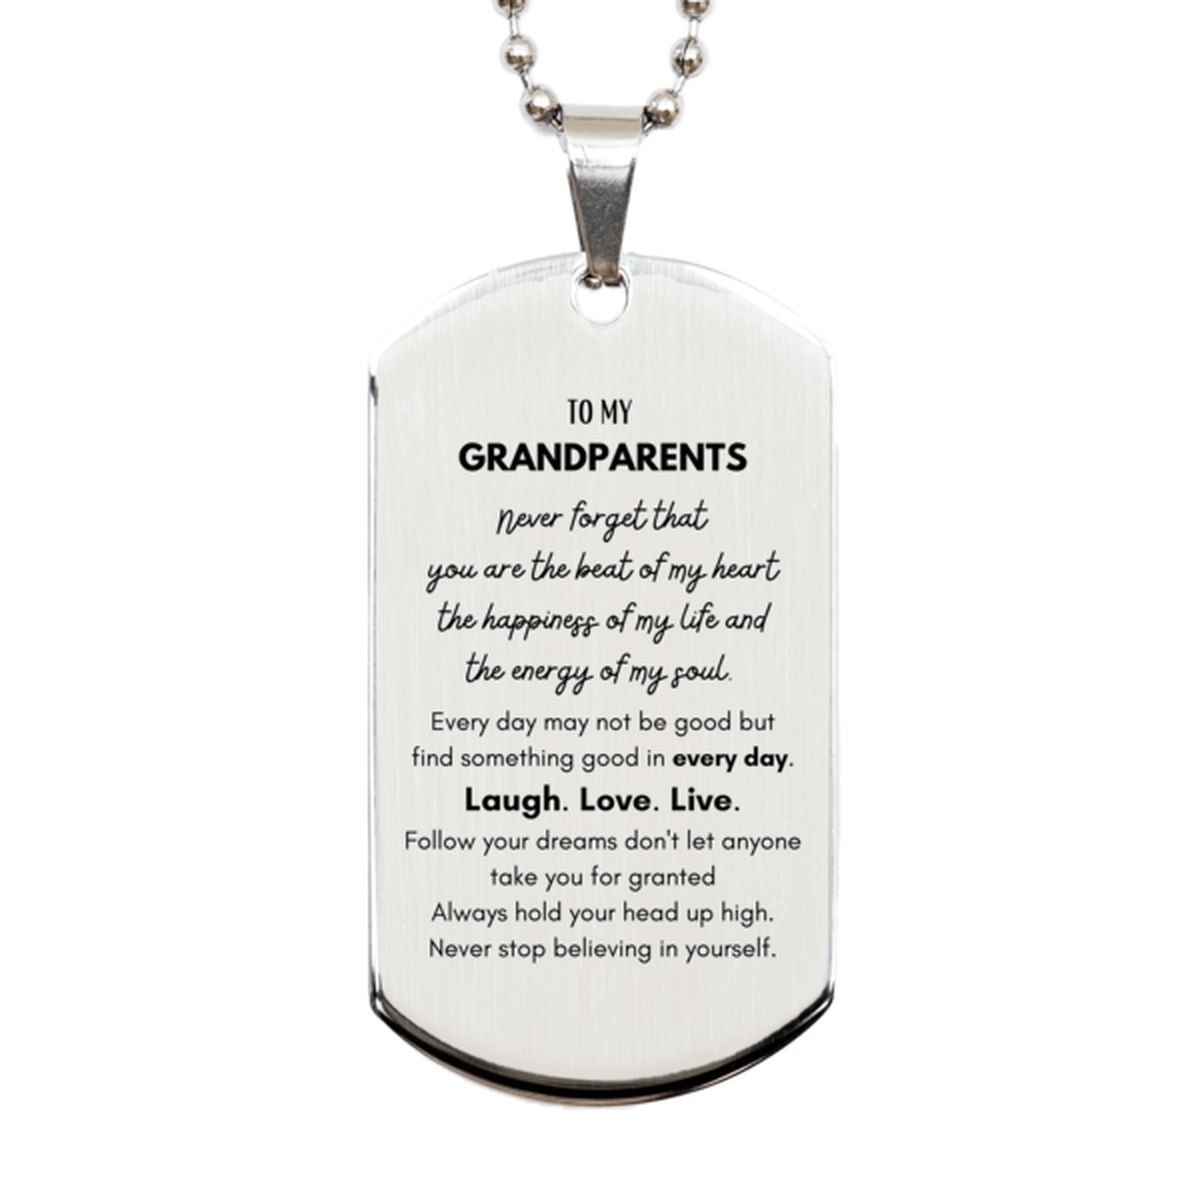 To My Grandparents Dogtag Gifts, Christmas Grandparents Silver Dog Tag Present, Birthday Unique Motivational For Grandparents, To My Grandparents Never forget that you are the beat of my heart the happiness of my life and the energy of my soul